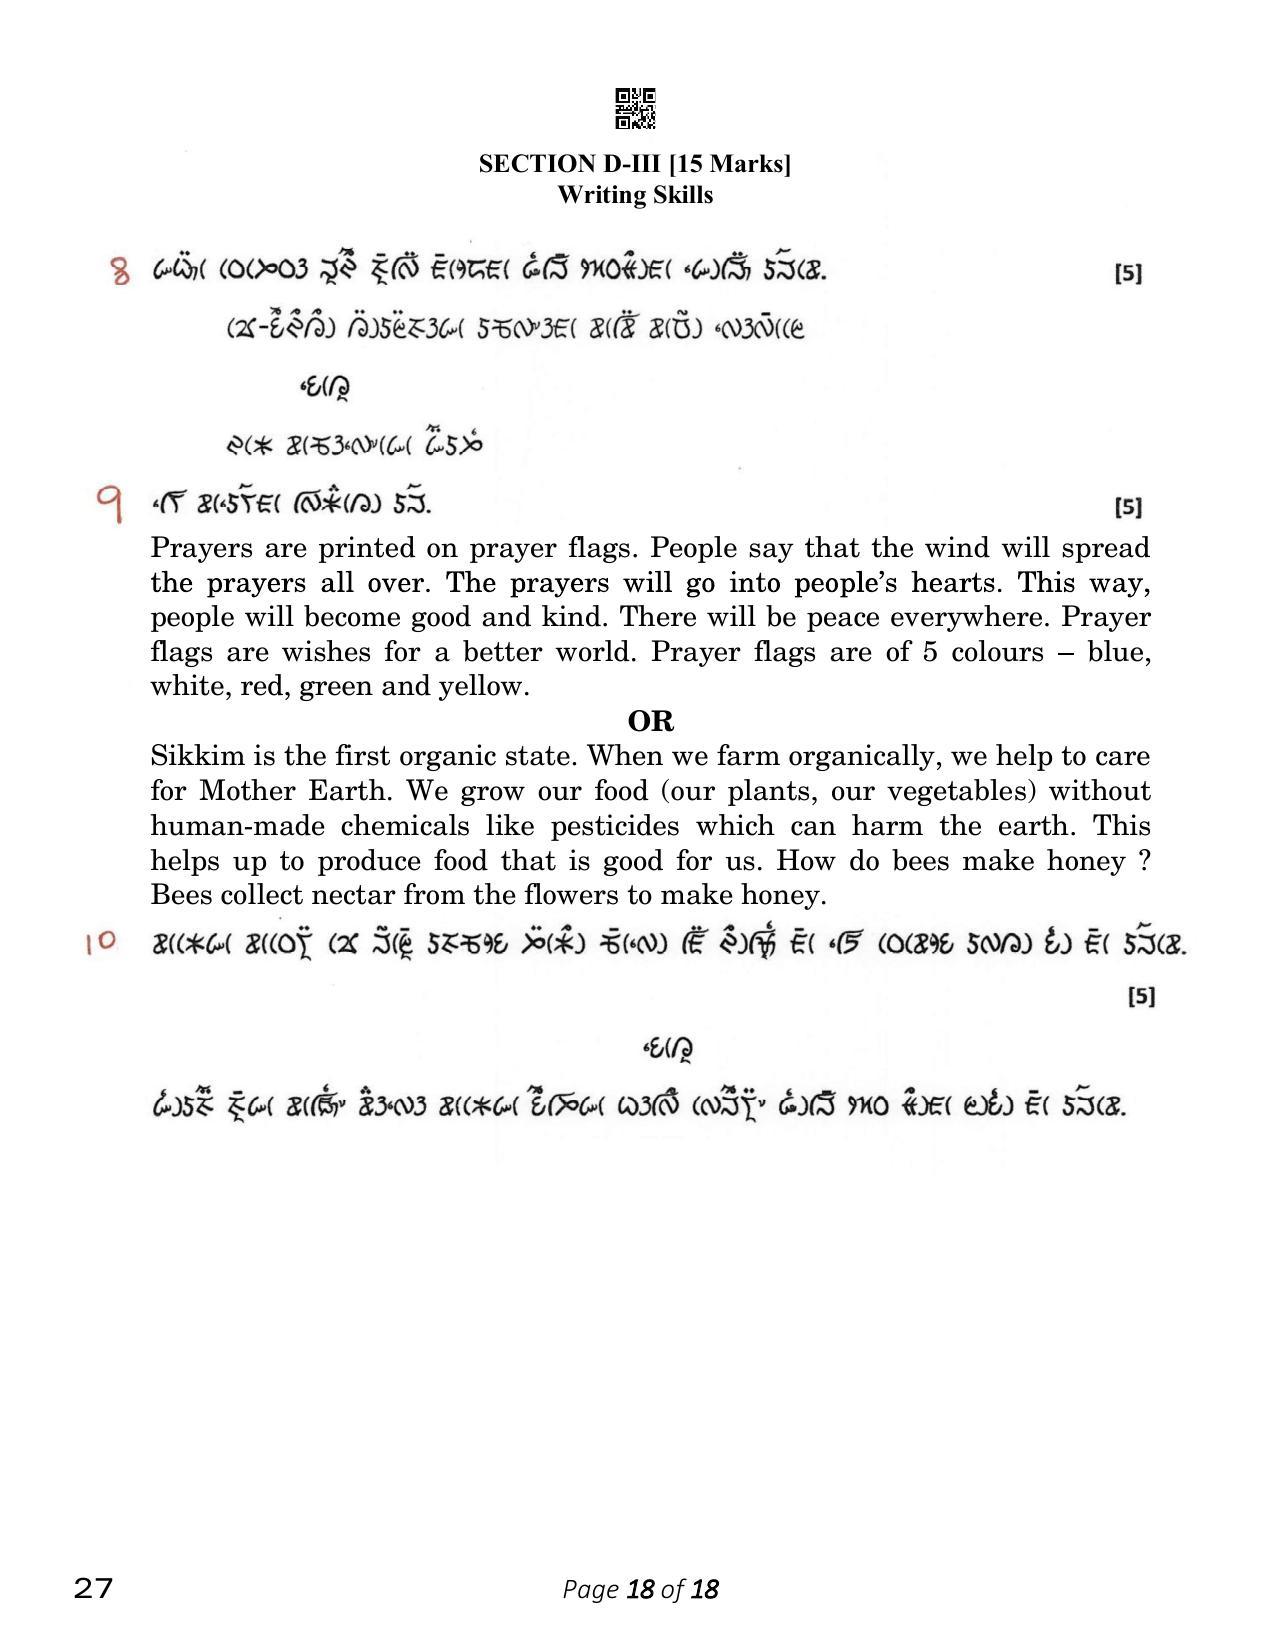 CBSE Class 10 27_Lepcha 2023 Question Paper - Page 18